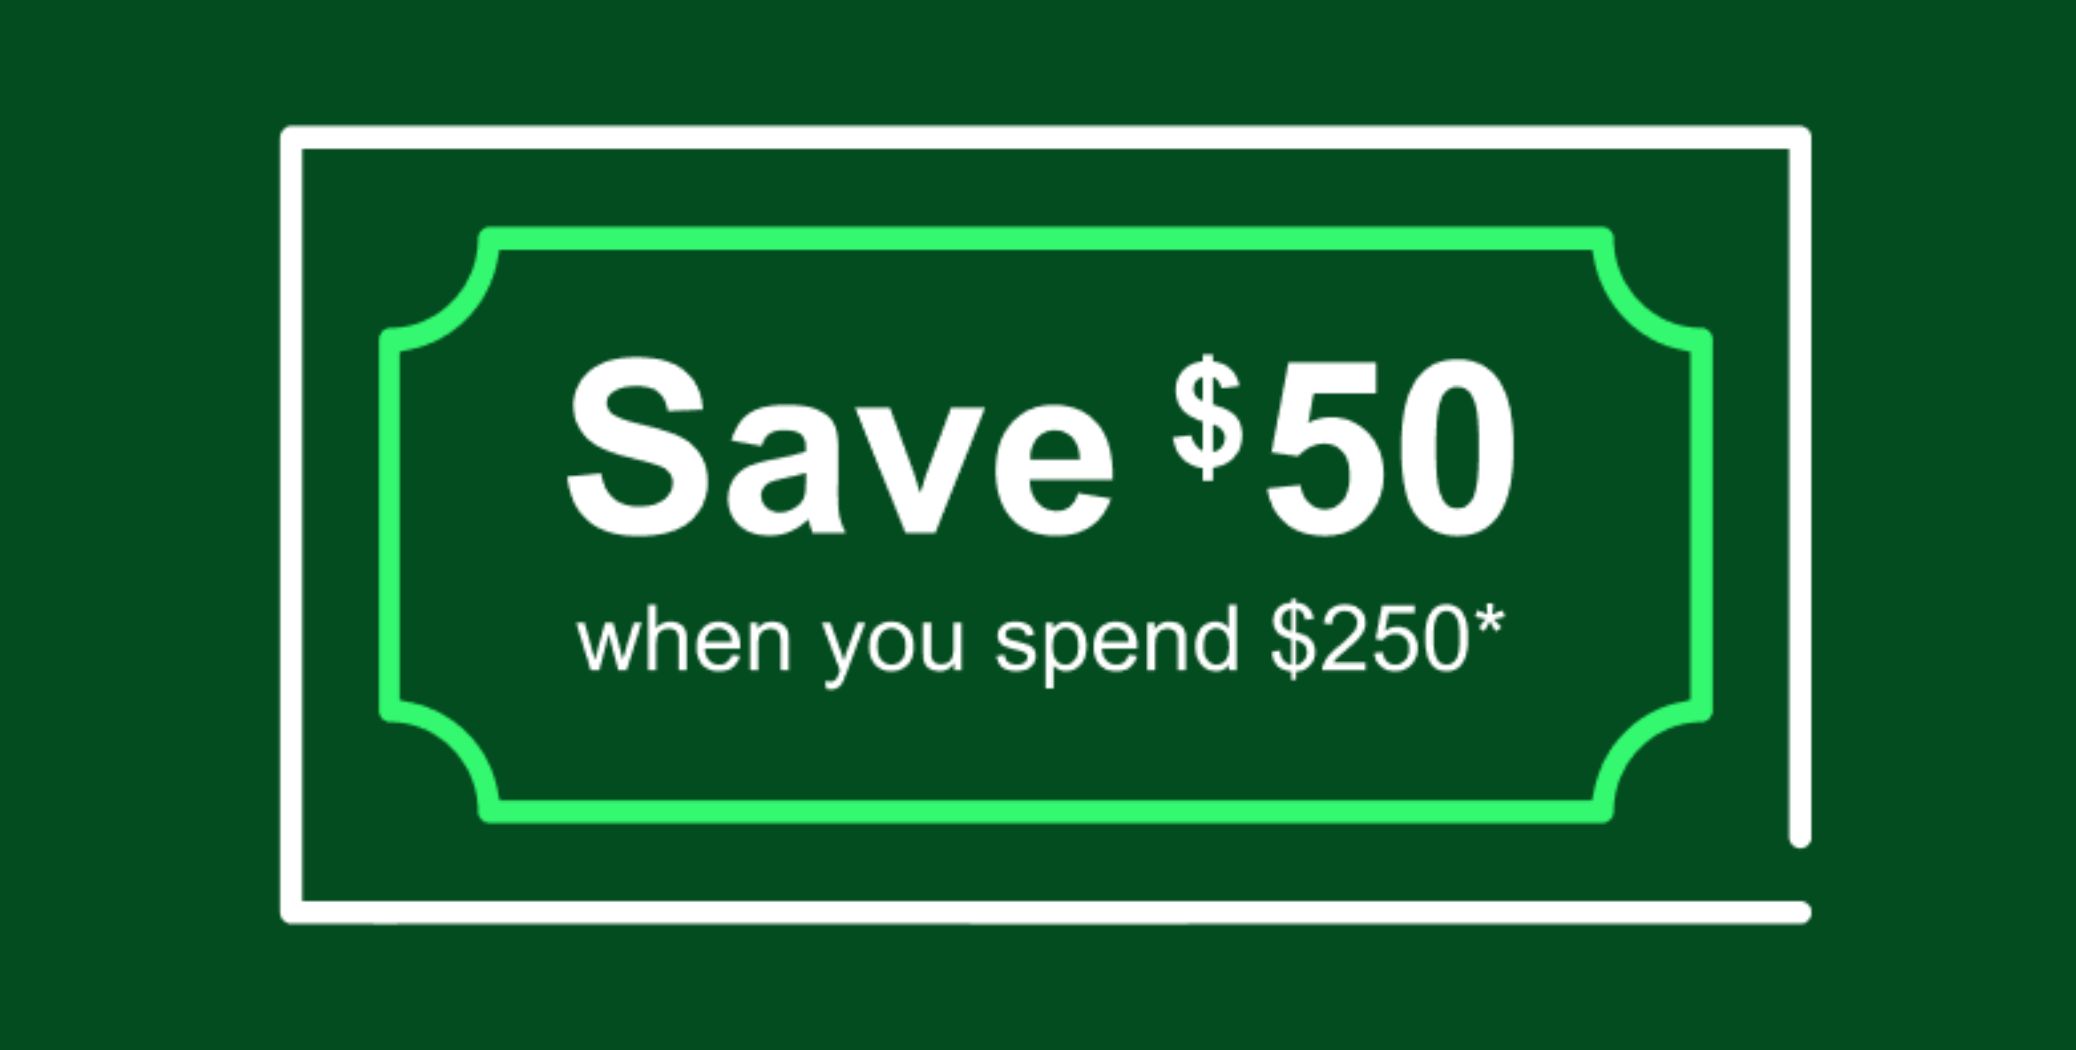 Save $50 when you spend $250 on questhealth.com